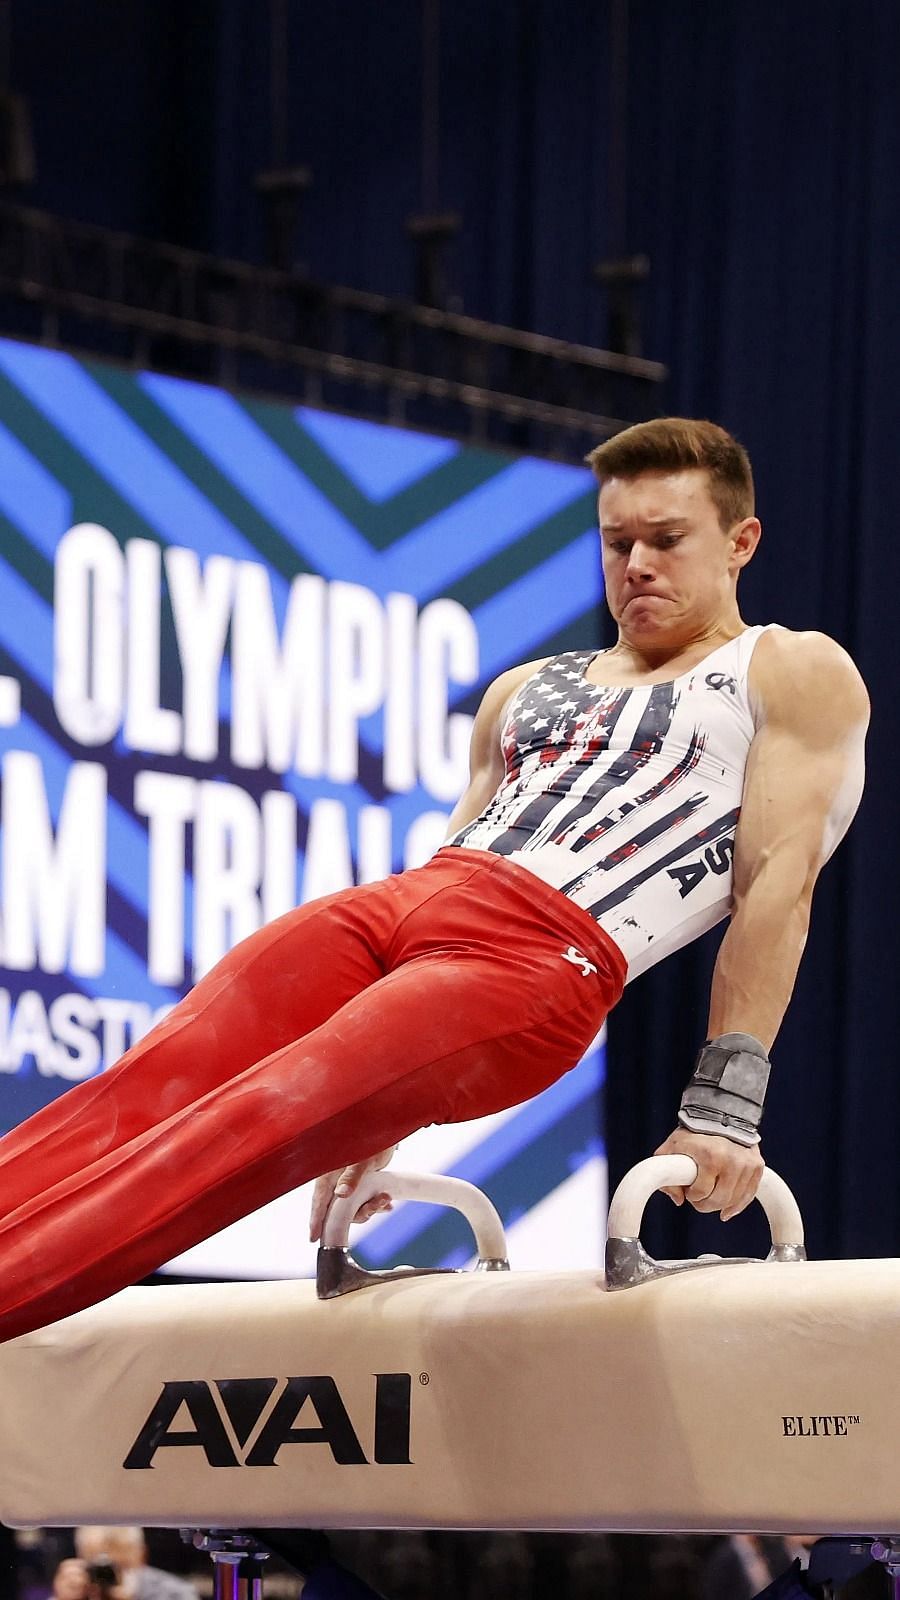 Us Olympic Gymnastics Trials 21 Results Brody Malone Seals Tokyo Berth After A Stunning Performance In All Around